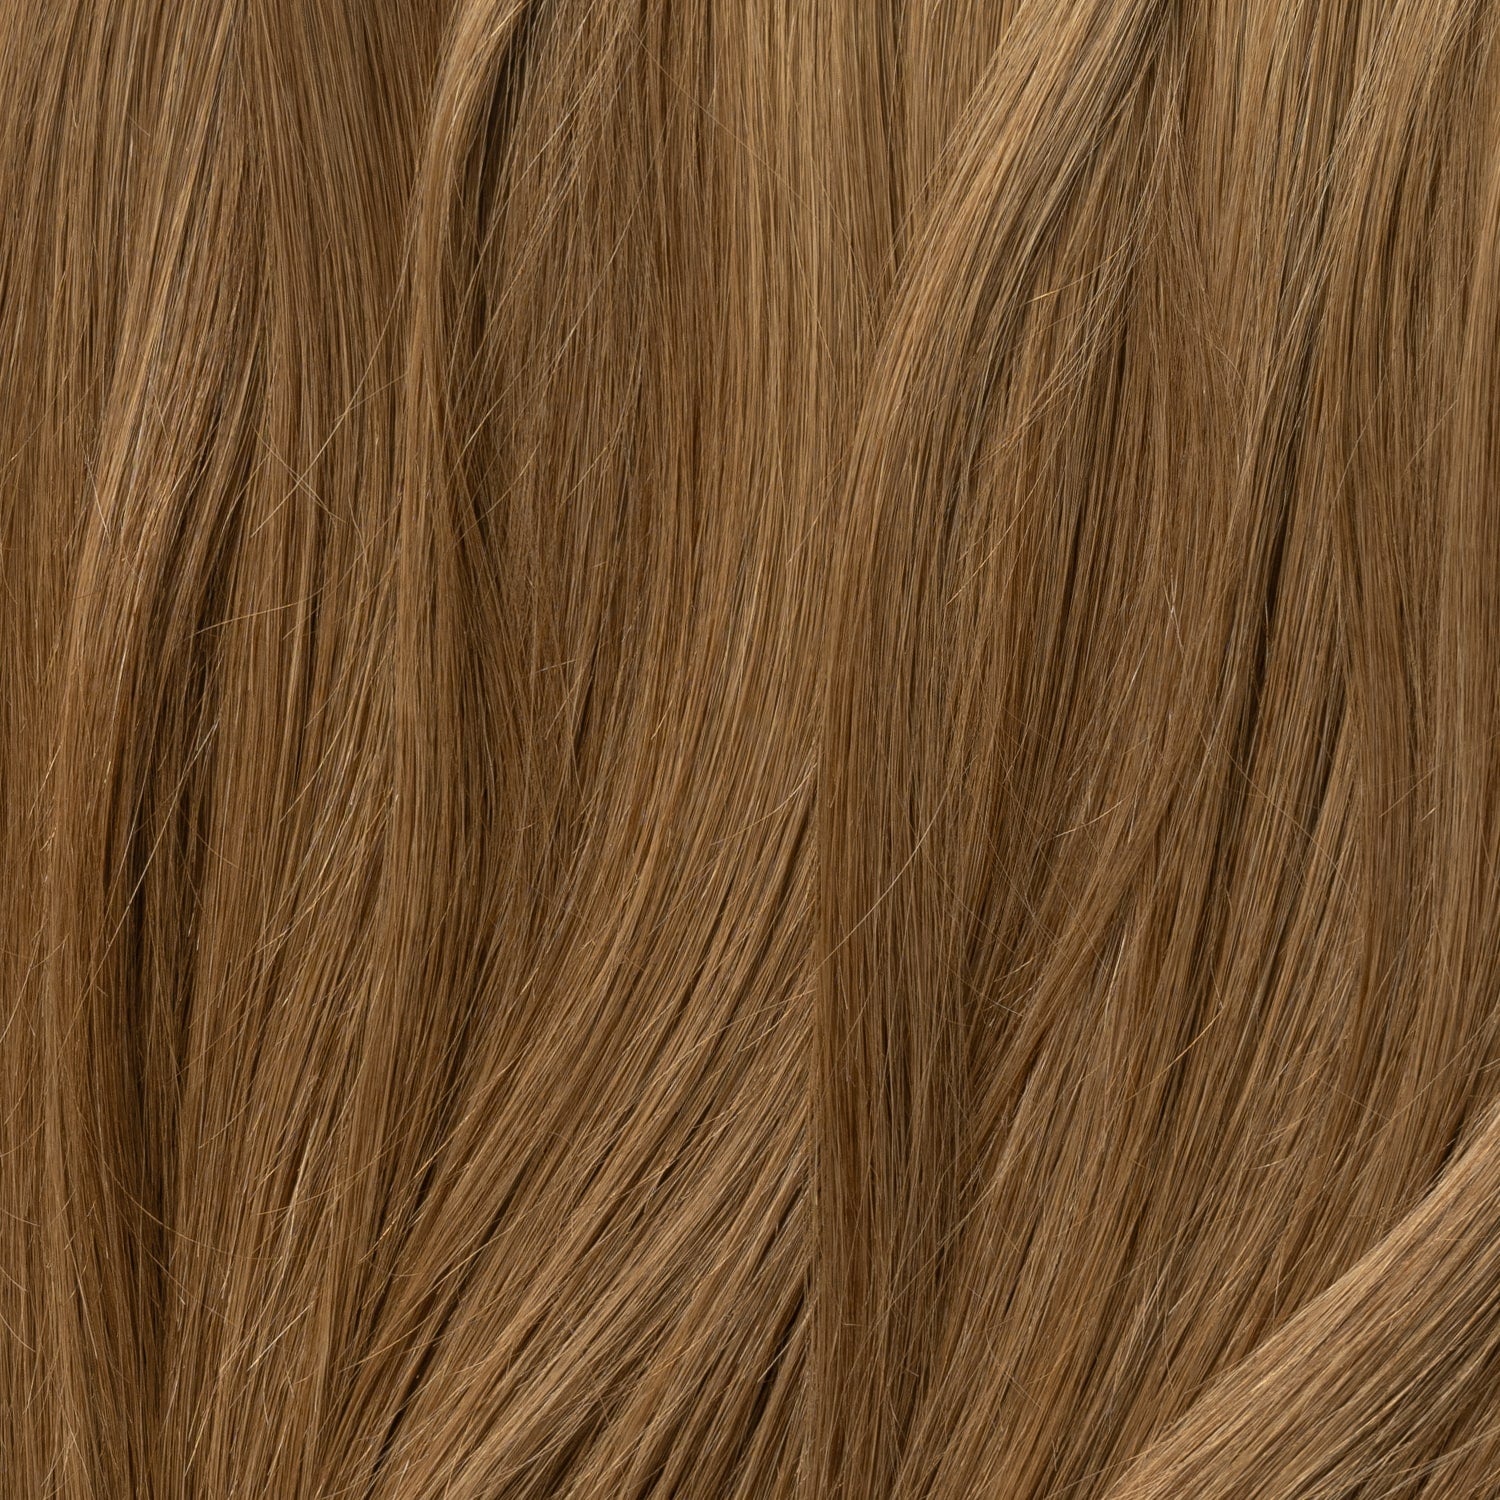 Flip in Extensions - Light Natural Brown 5